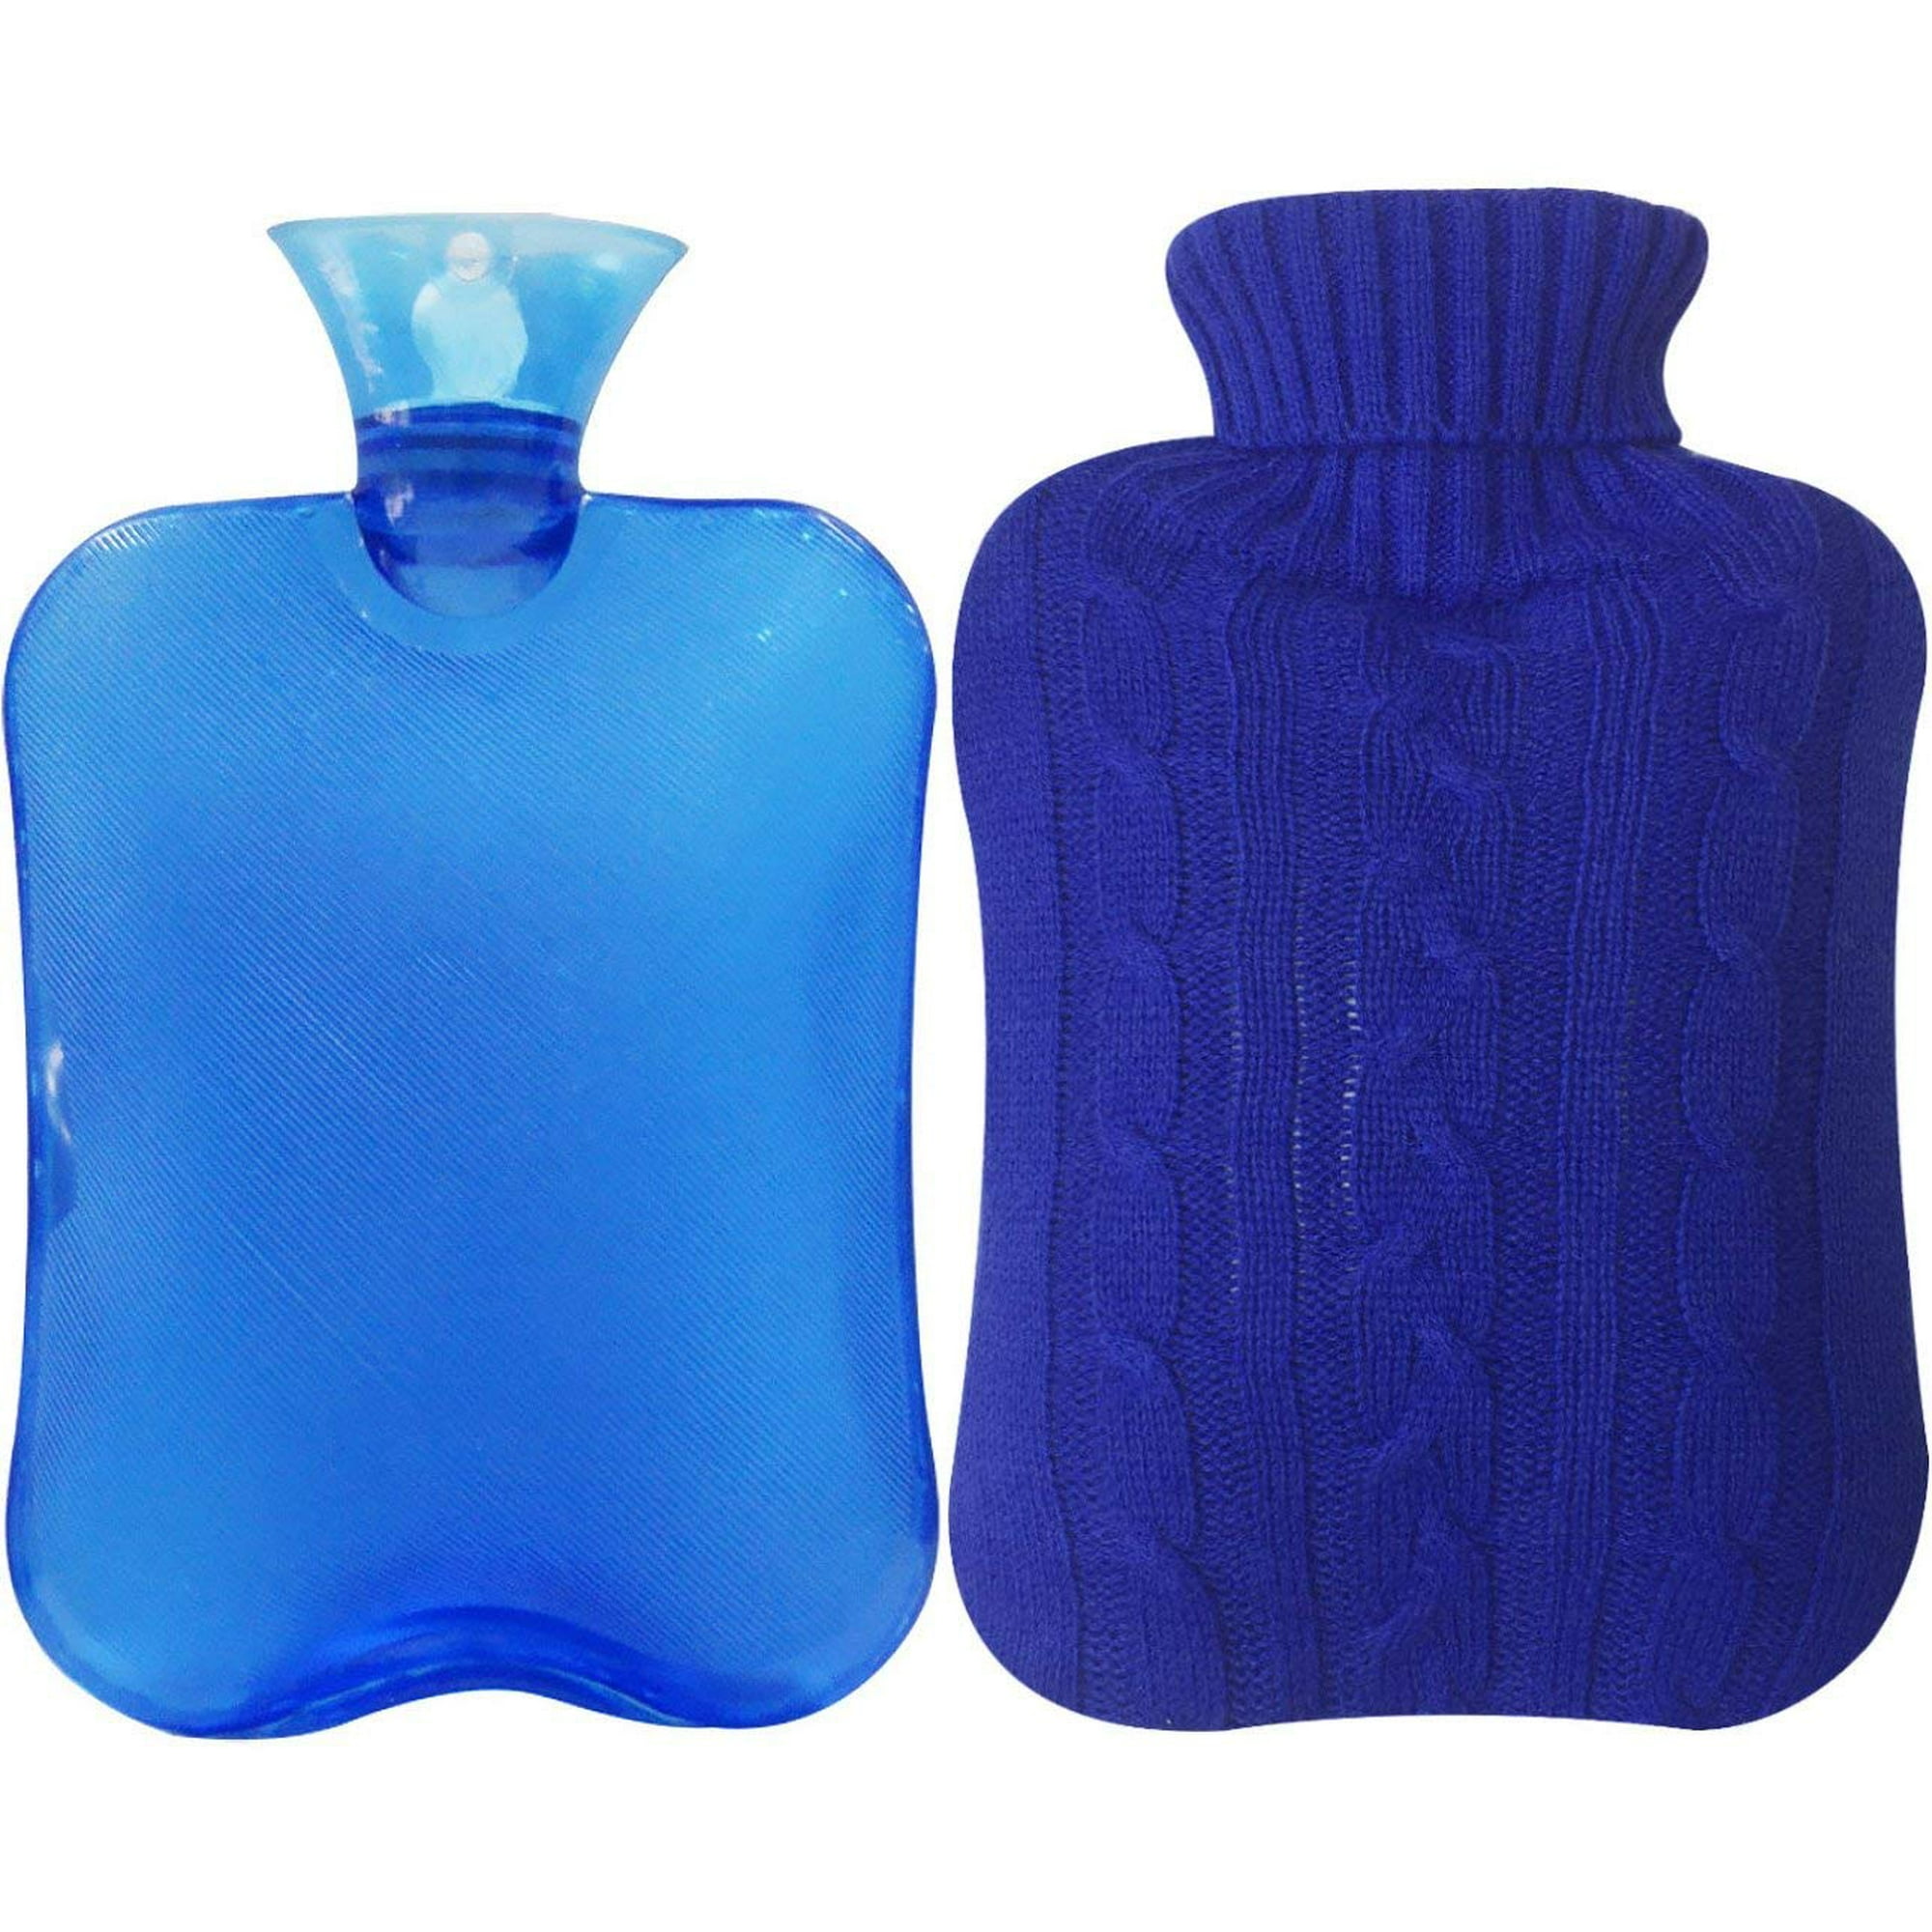 2 Liter Hot Water Bottle, Ease Aches and Pains Aid Comfort Sleep, 